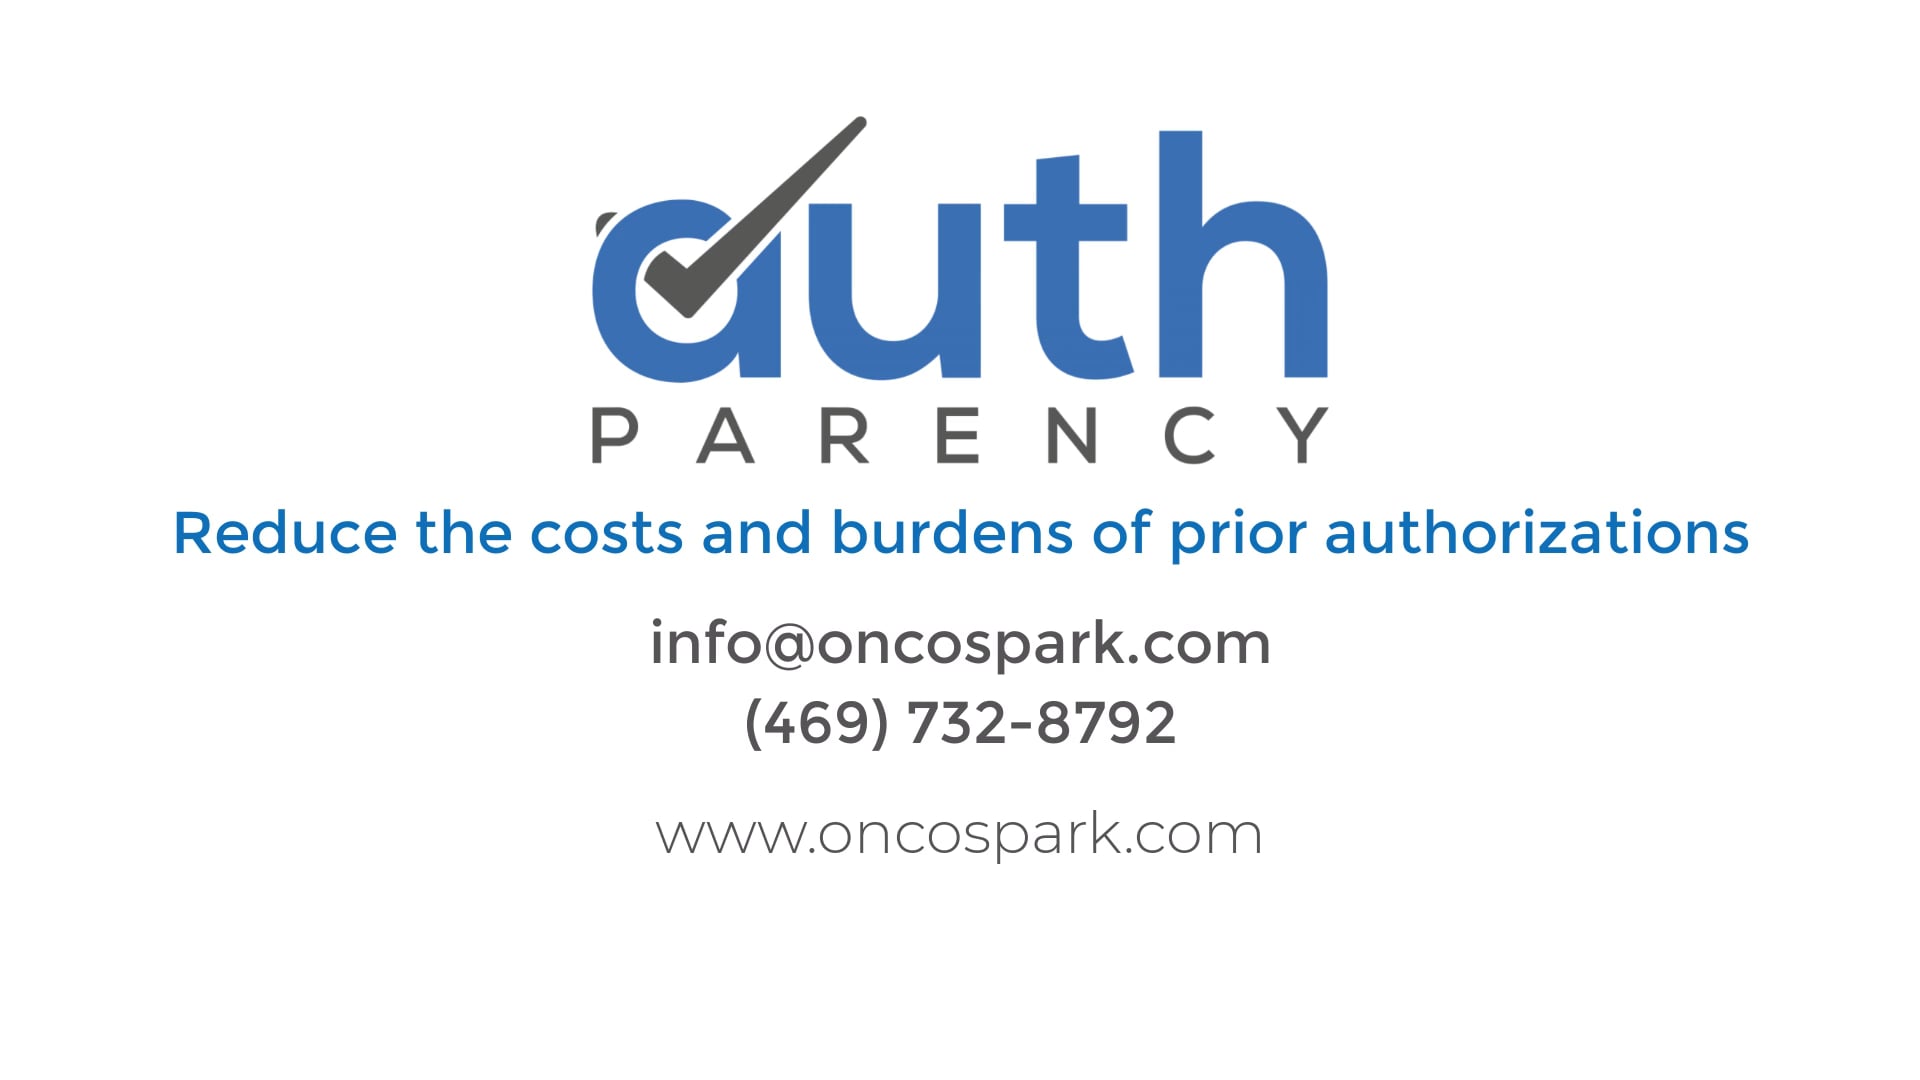 AuthParency: Reduce the costs & burdens of prior authorizations